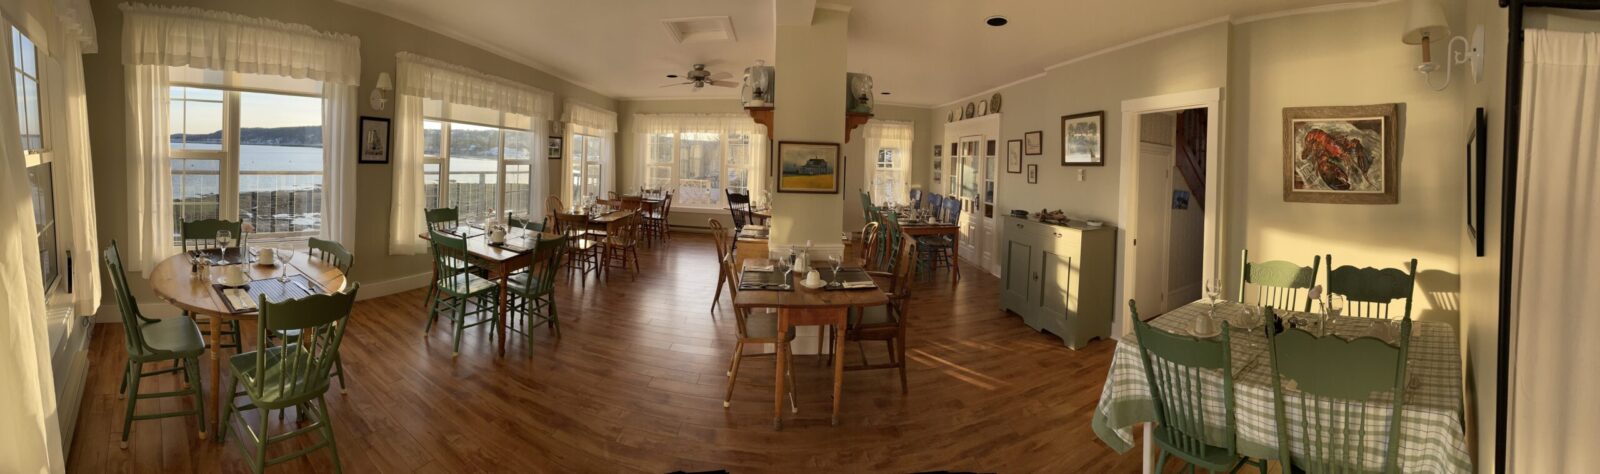 A 360 degree view of a dining room.